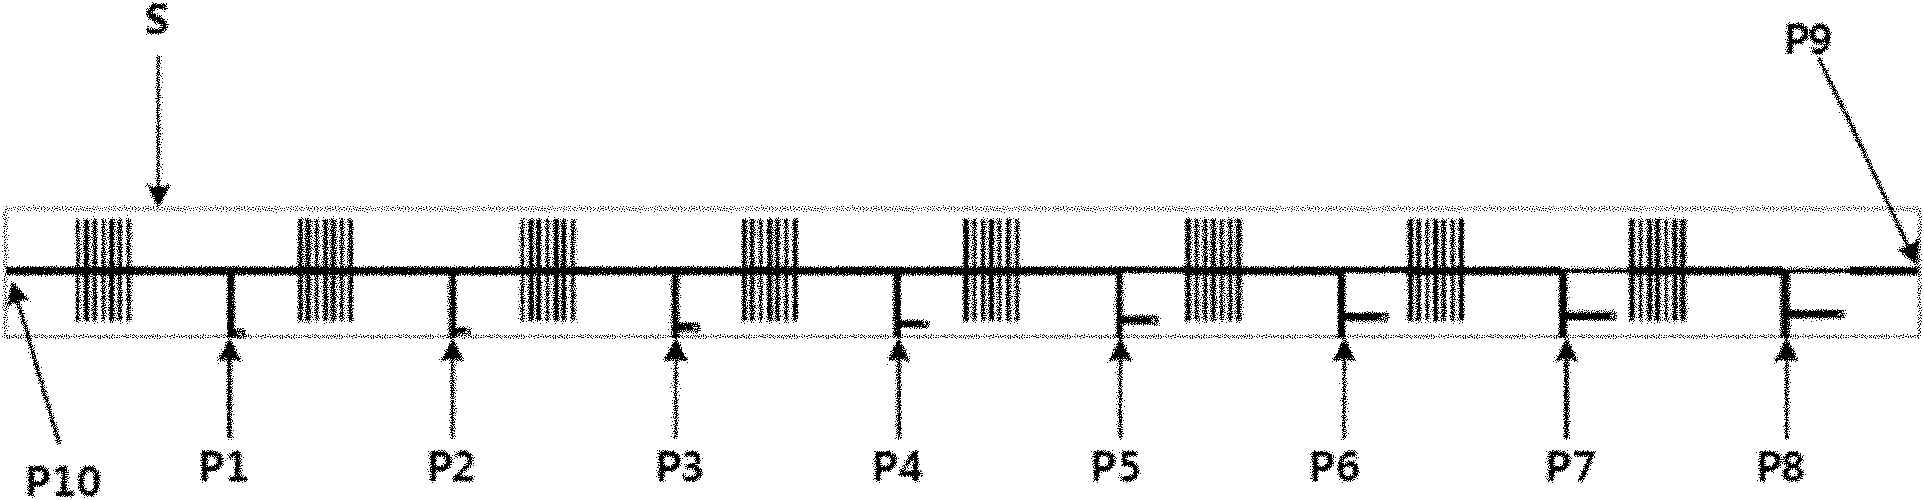 Frequency-scanning antenna array based on CRLH-TL